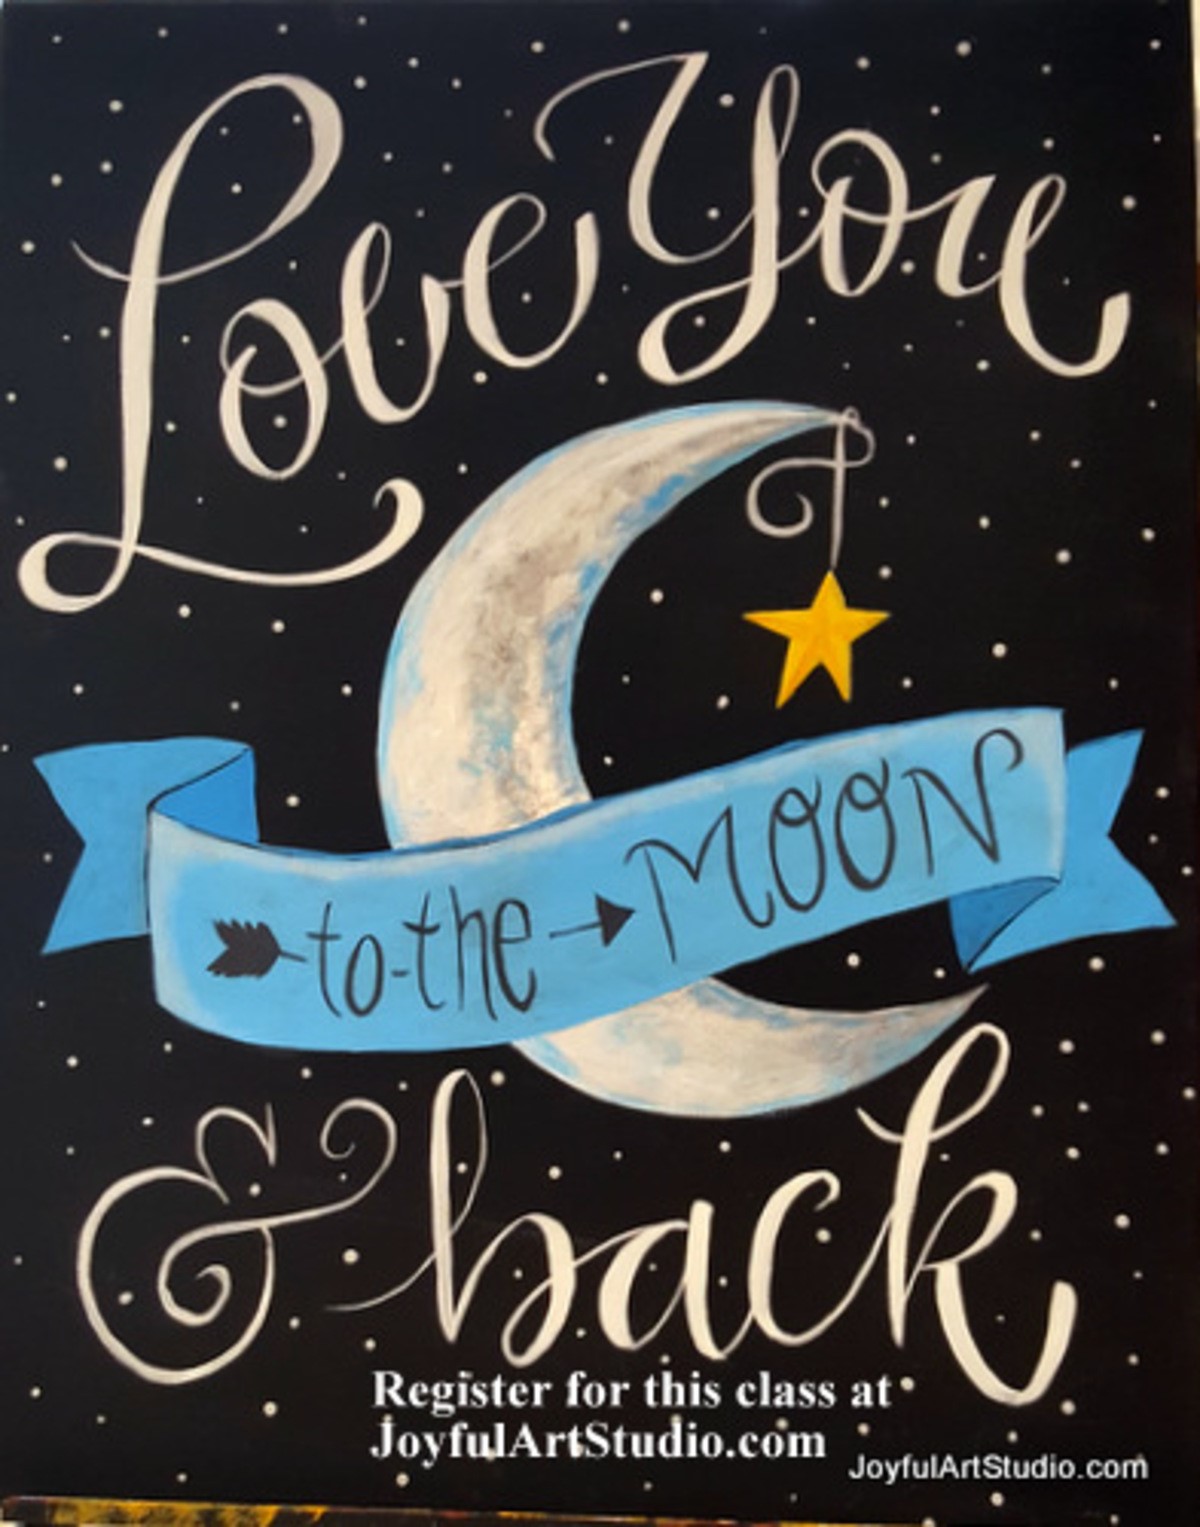 Greencastle Joyful Arts Studio Painting Class Love You To The Moon Back Visit Franklin County Pa